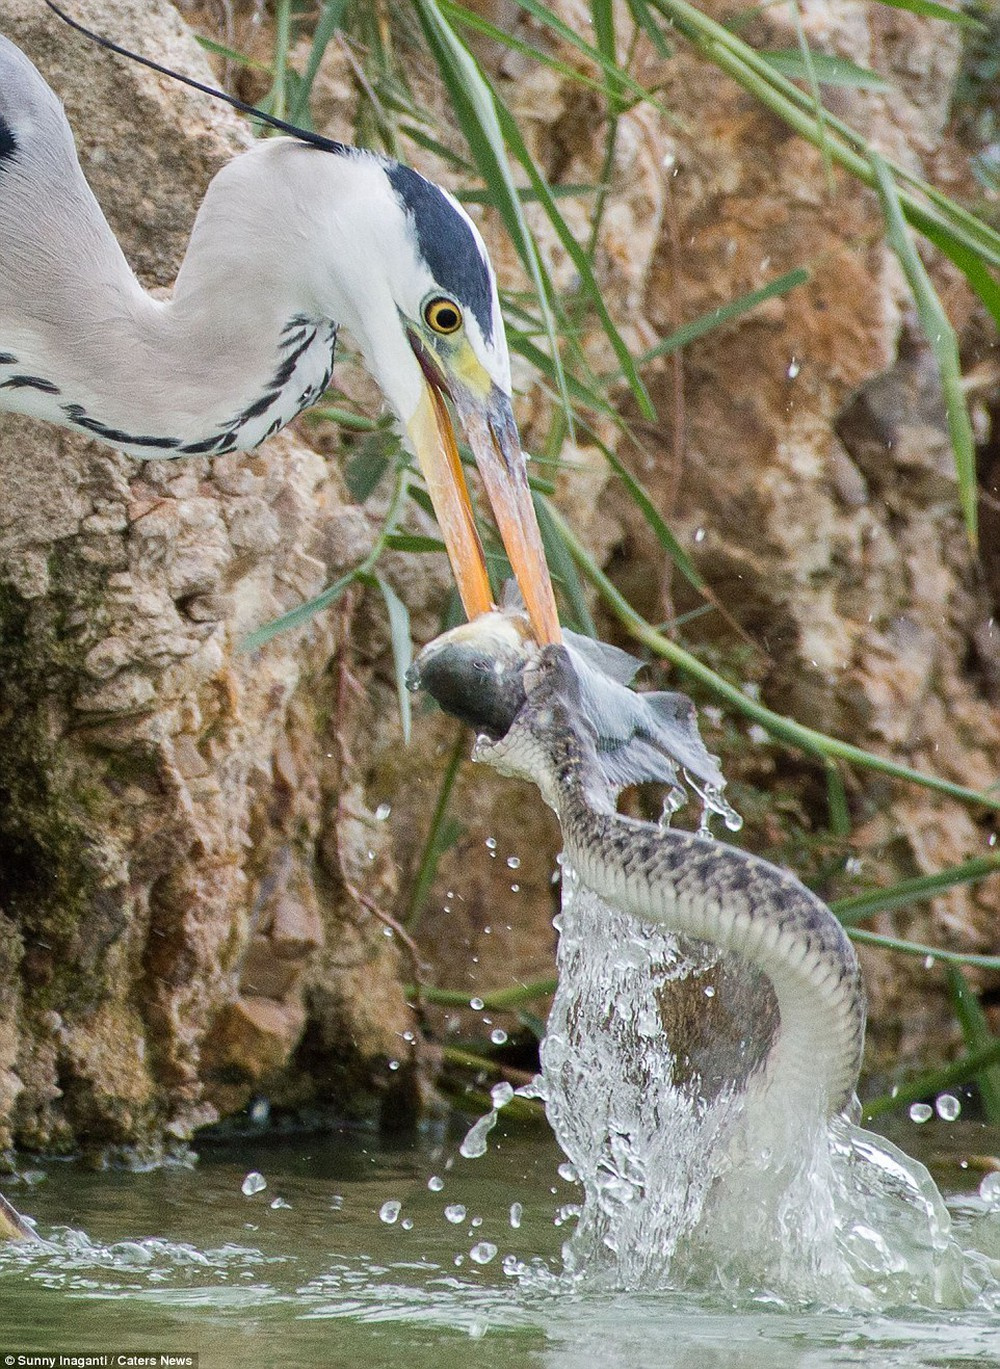 heron stealing a fish from a snake